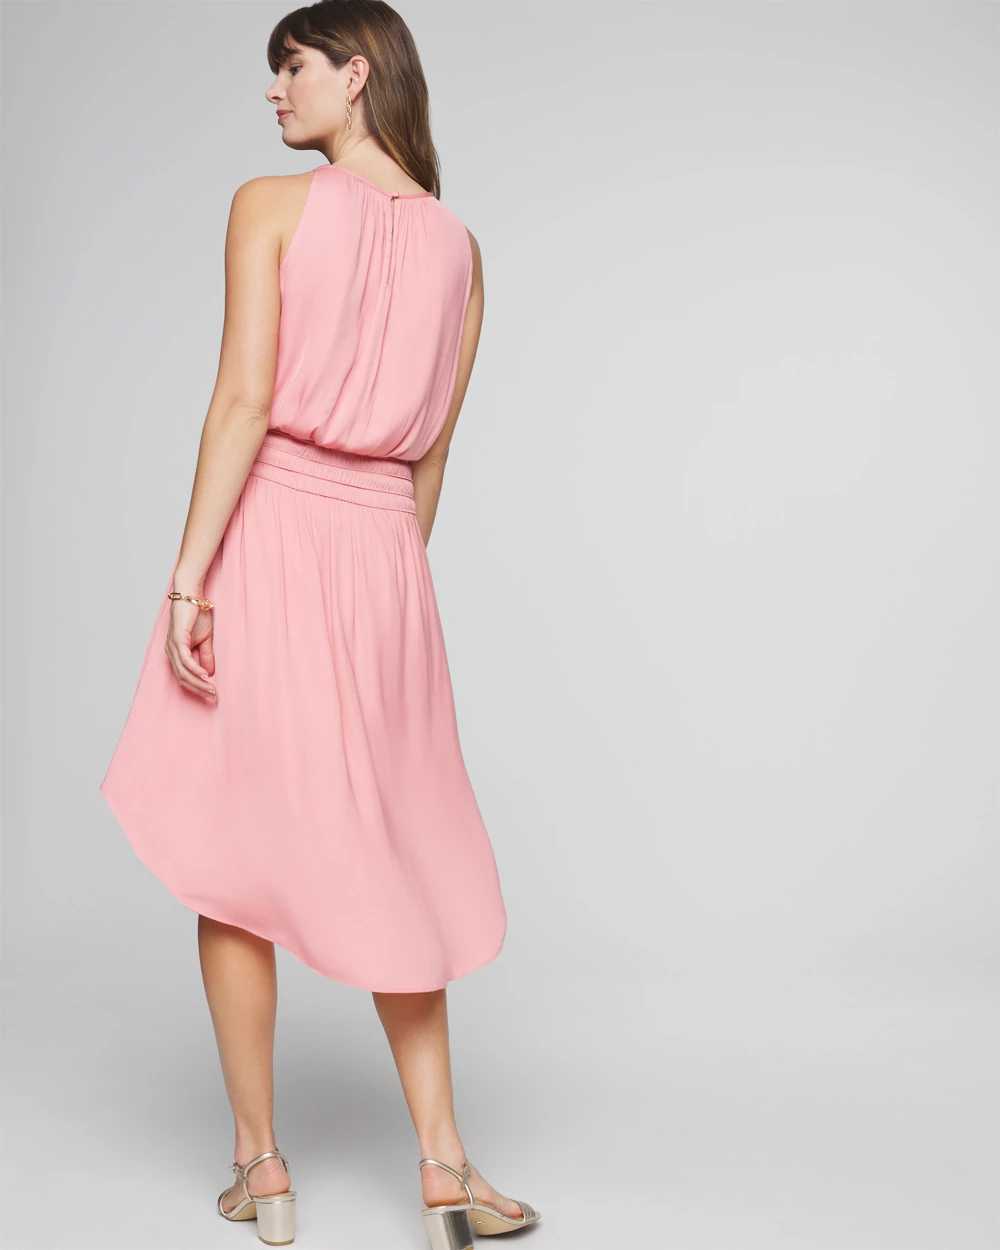 High-Neck Smocked Midi Dress click to view larger image.